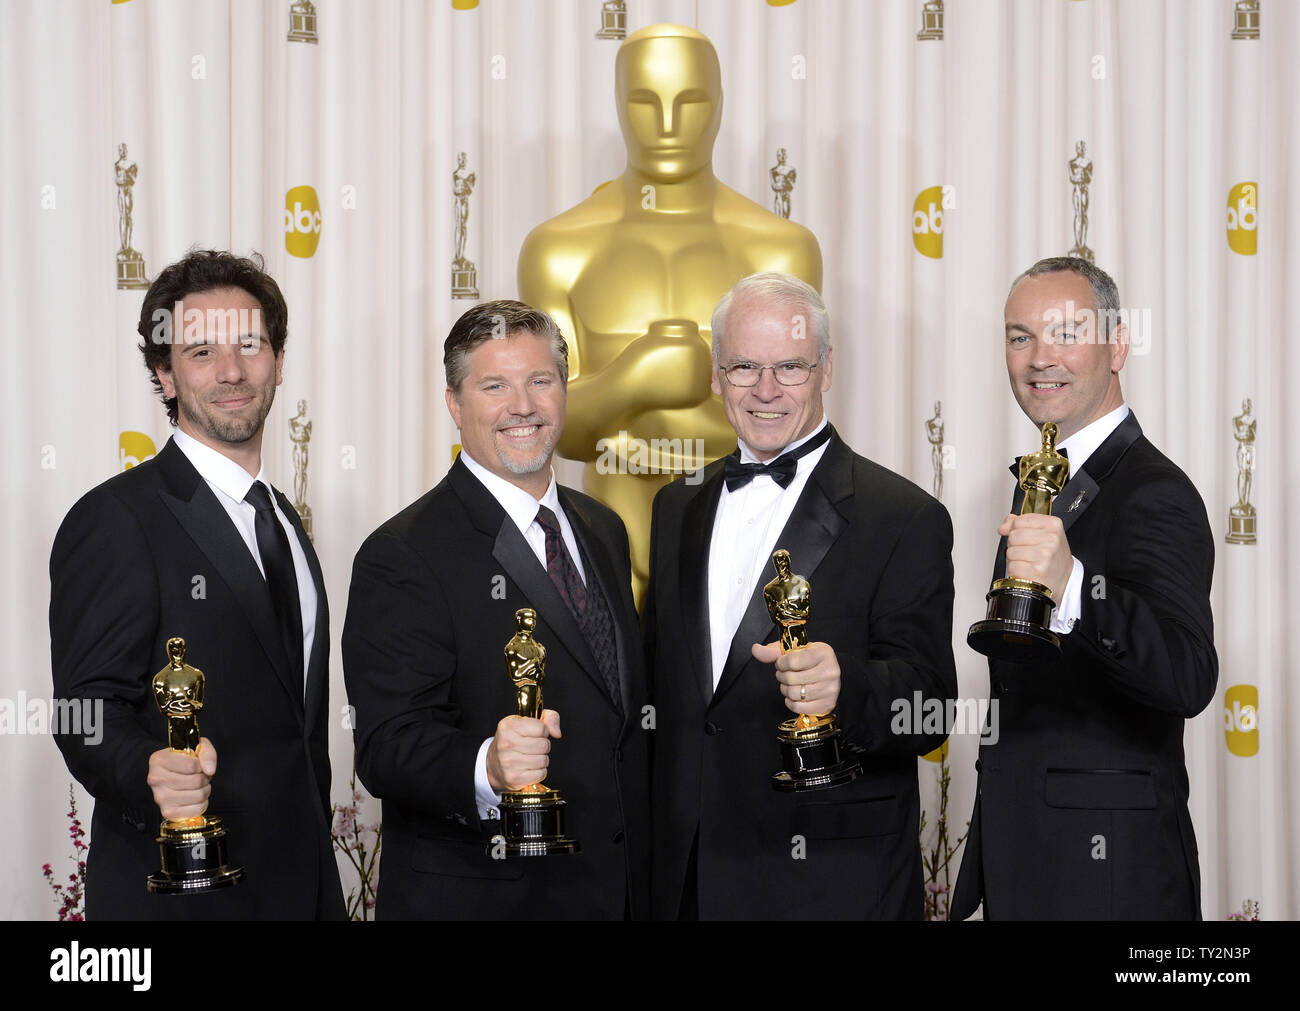 Bill Westenhofer, Guillaume Rocheron, Erik-Jan De Boer and Donald R. Elliott holds their Oscars for Achievement in Visual Effects for 'Life of Pie'  backstage at the 85th Academy Awards at the Hollywood and Highlands Center in the Hollywood section of Los Angeles on February 24, 2013. UPI/Phil McCarten Stock Photo